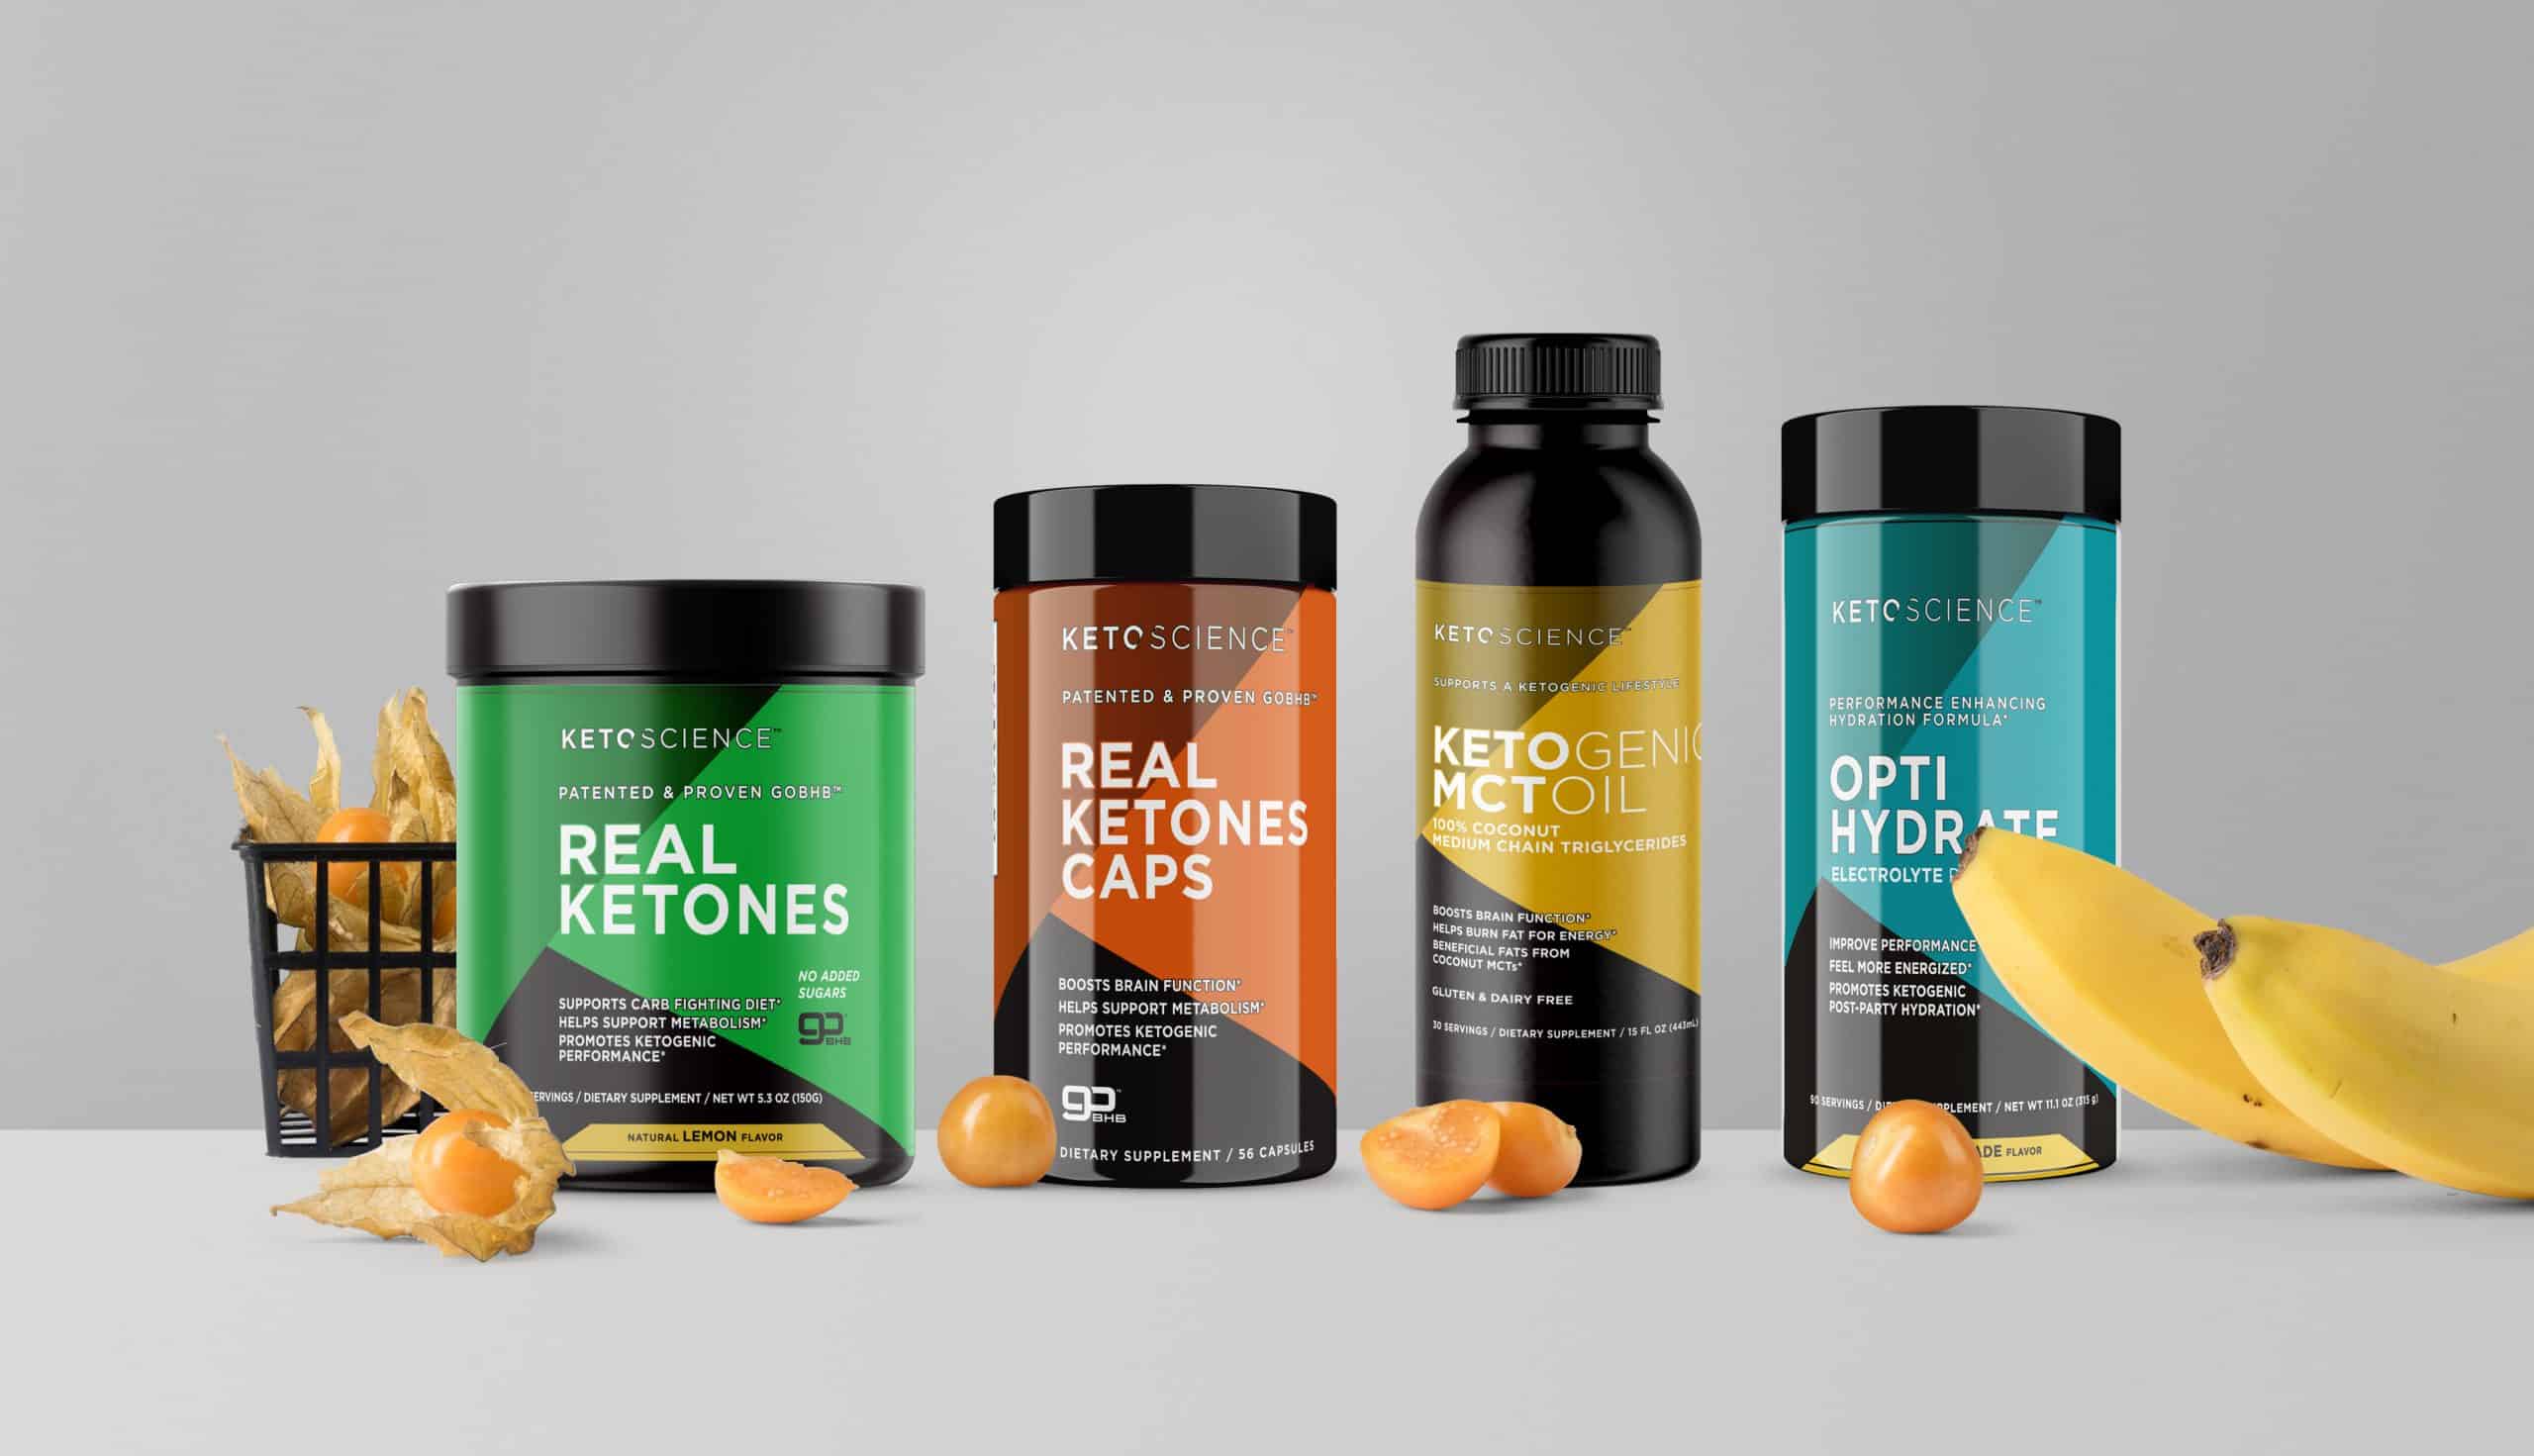 Keto Science vitamin web design landing page highlighting different product offerings.